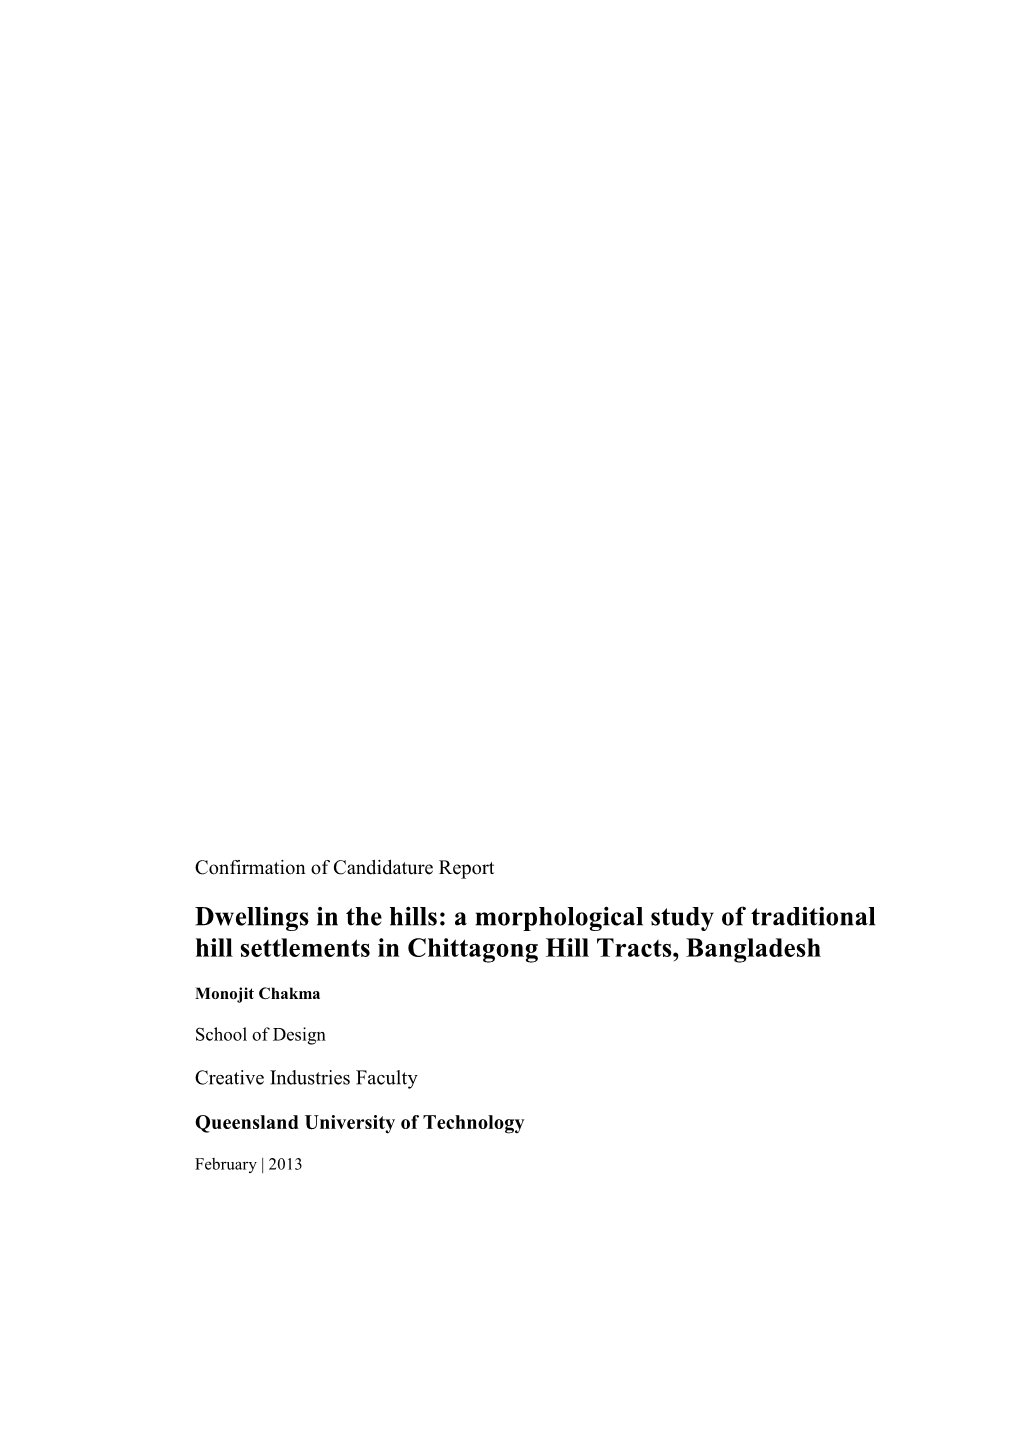 A Morphological Study of Traditional Hill Settlements in Chittagong Hill Tracts, Bangladesh